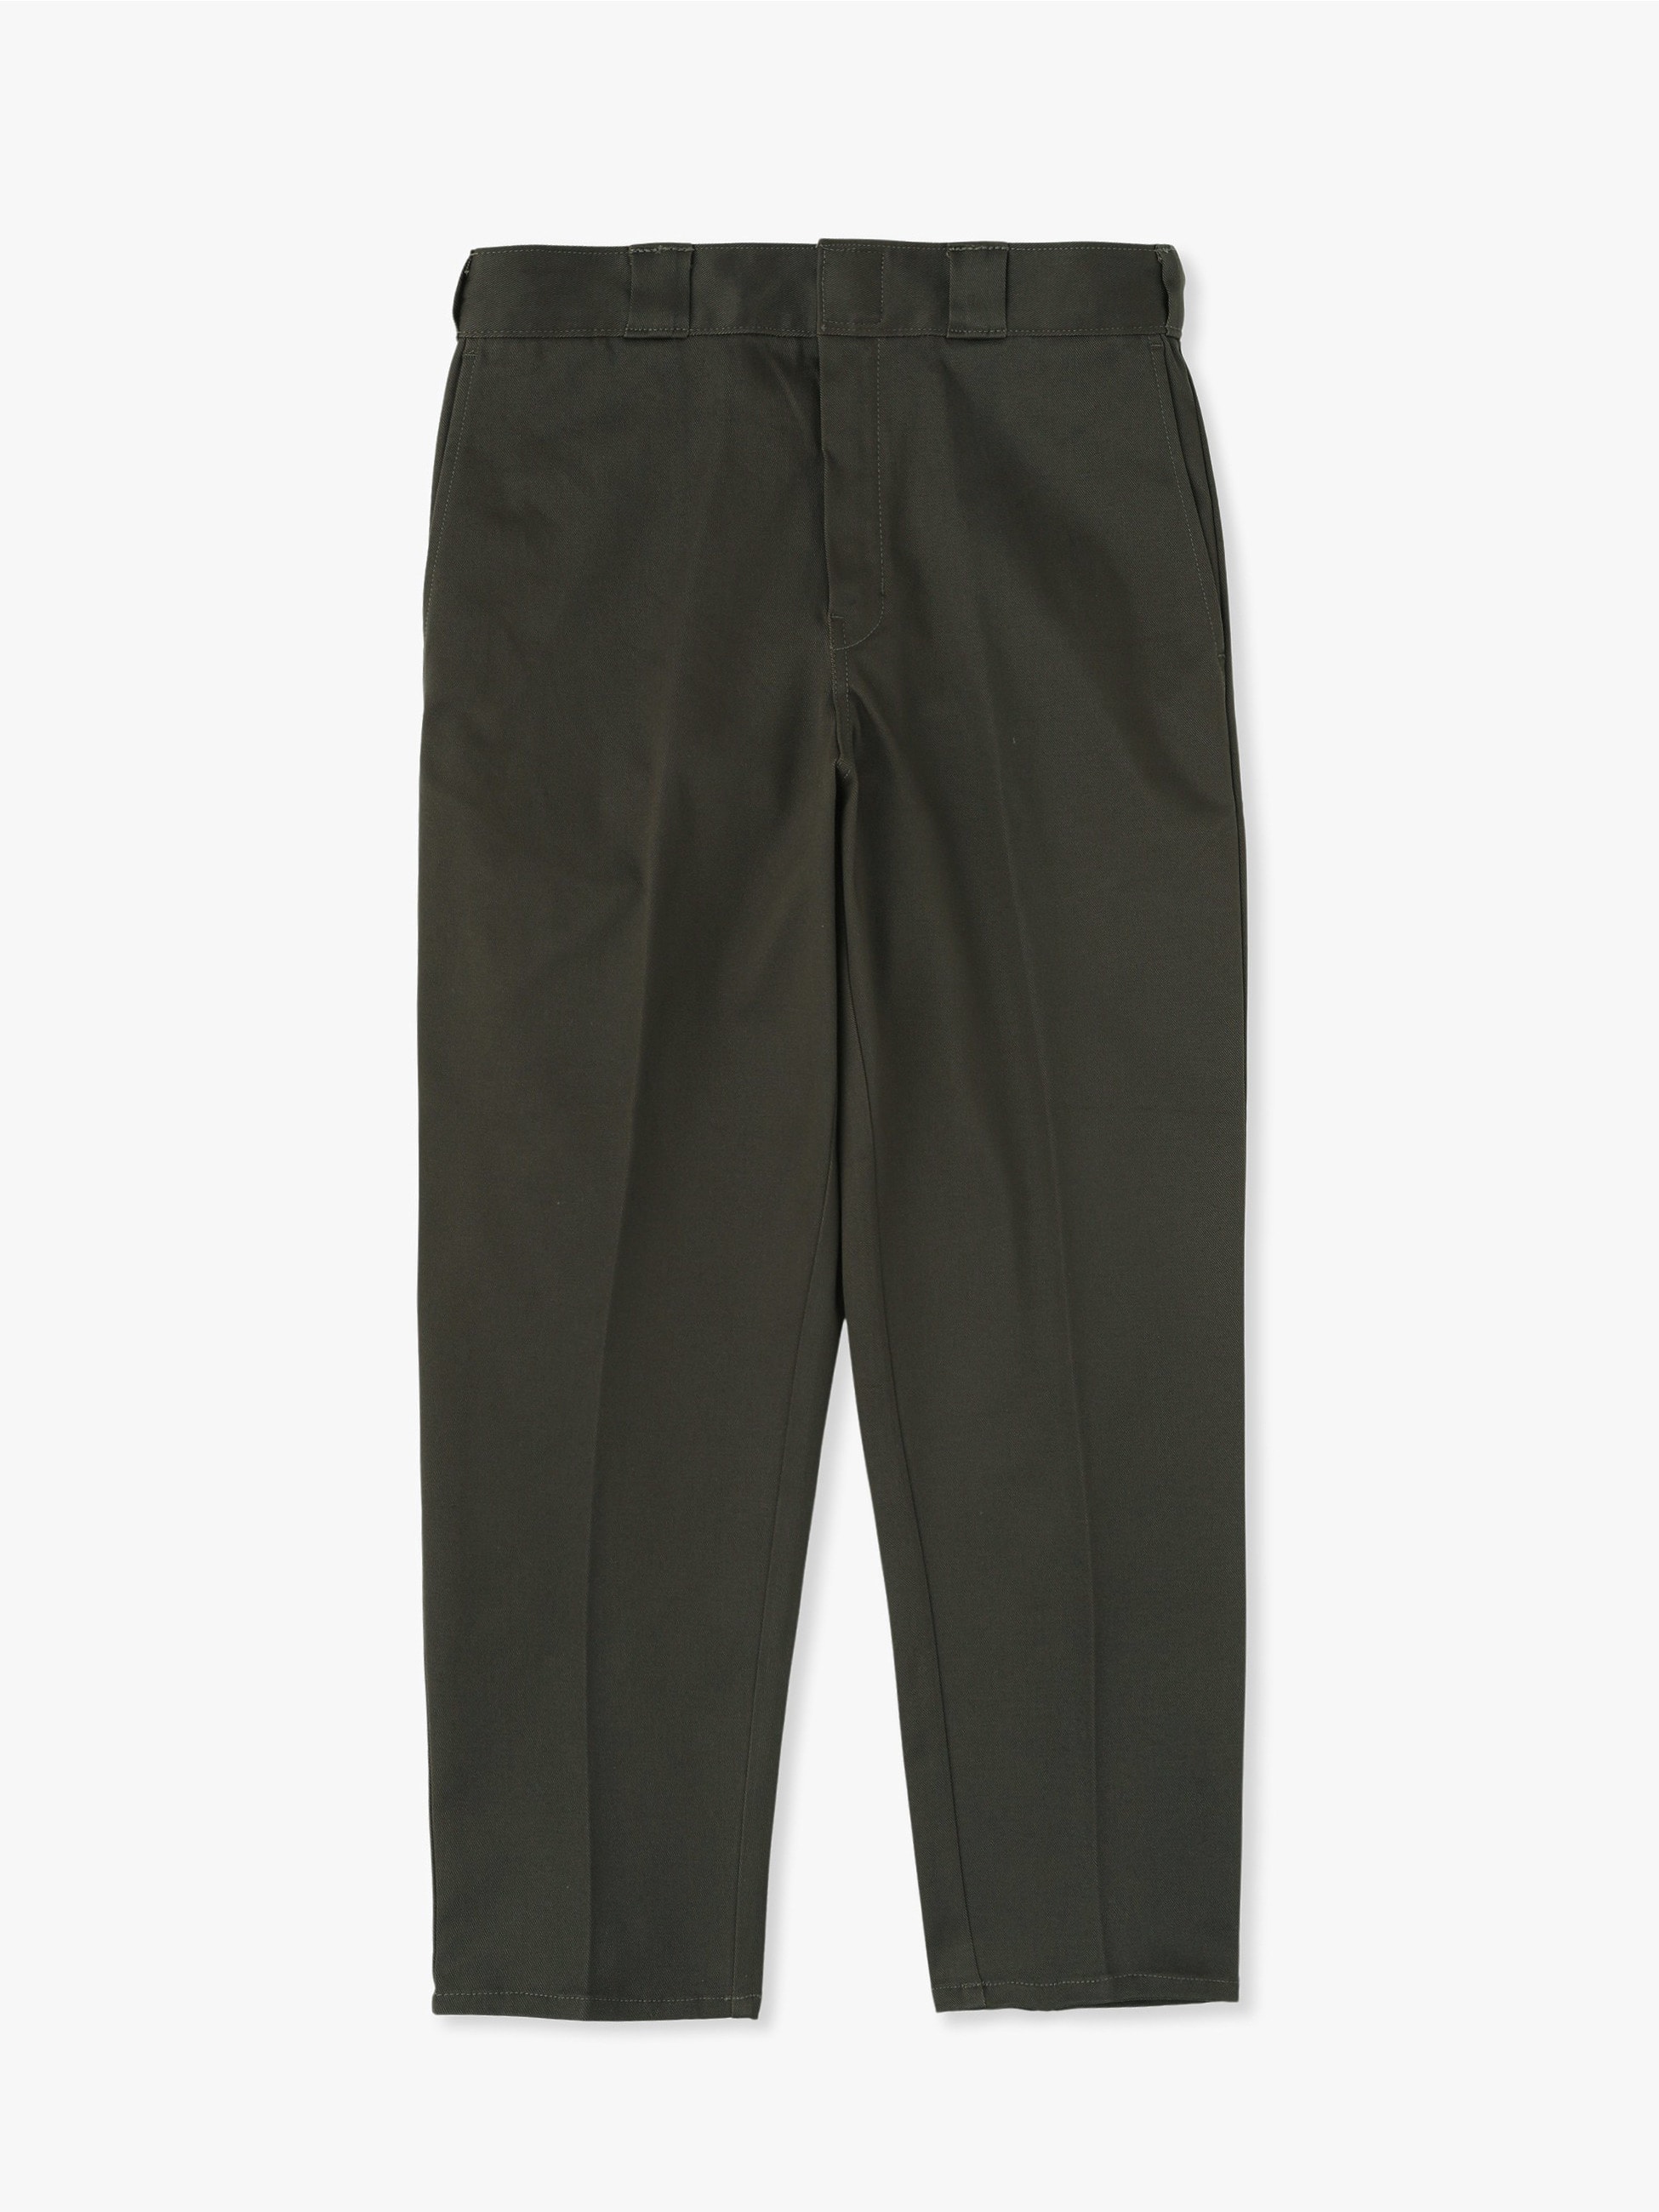 Mens Workwear Modern Chino Fit Stretch メンズ Pants Trousers スーツ・セットアップ ...